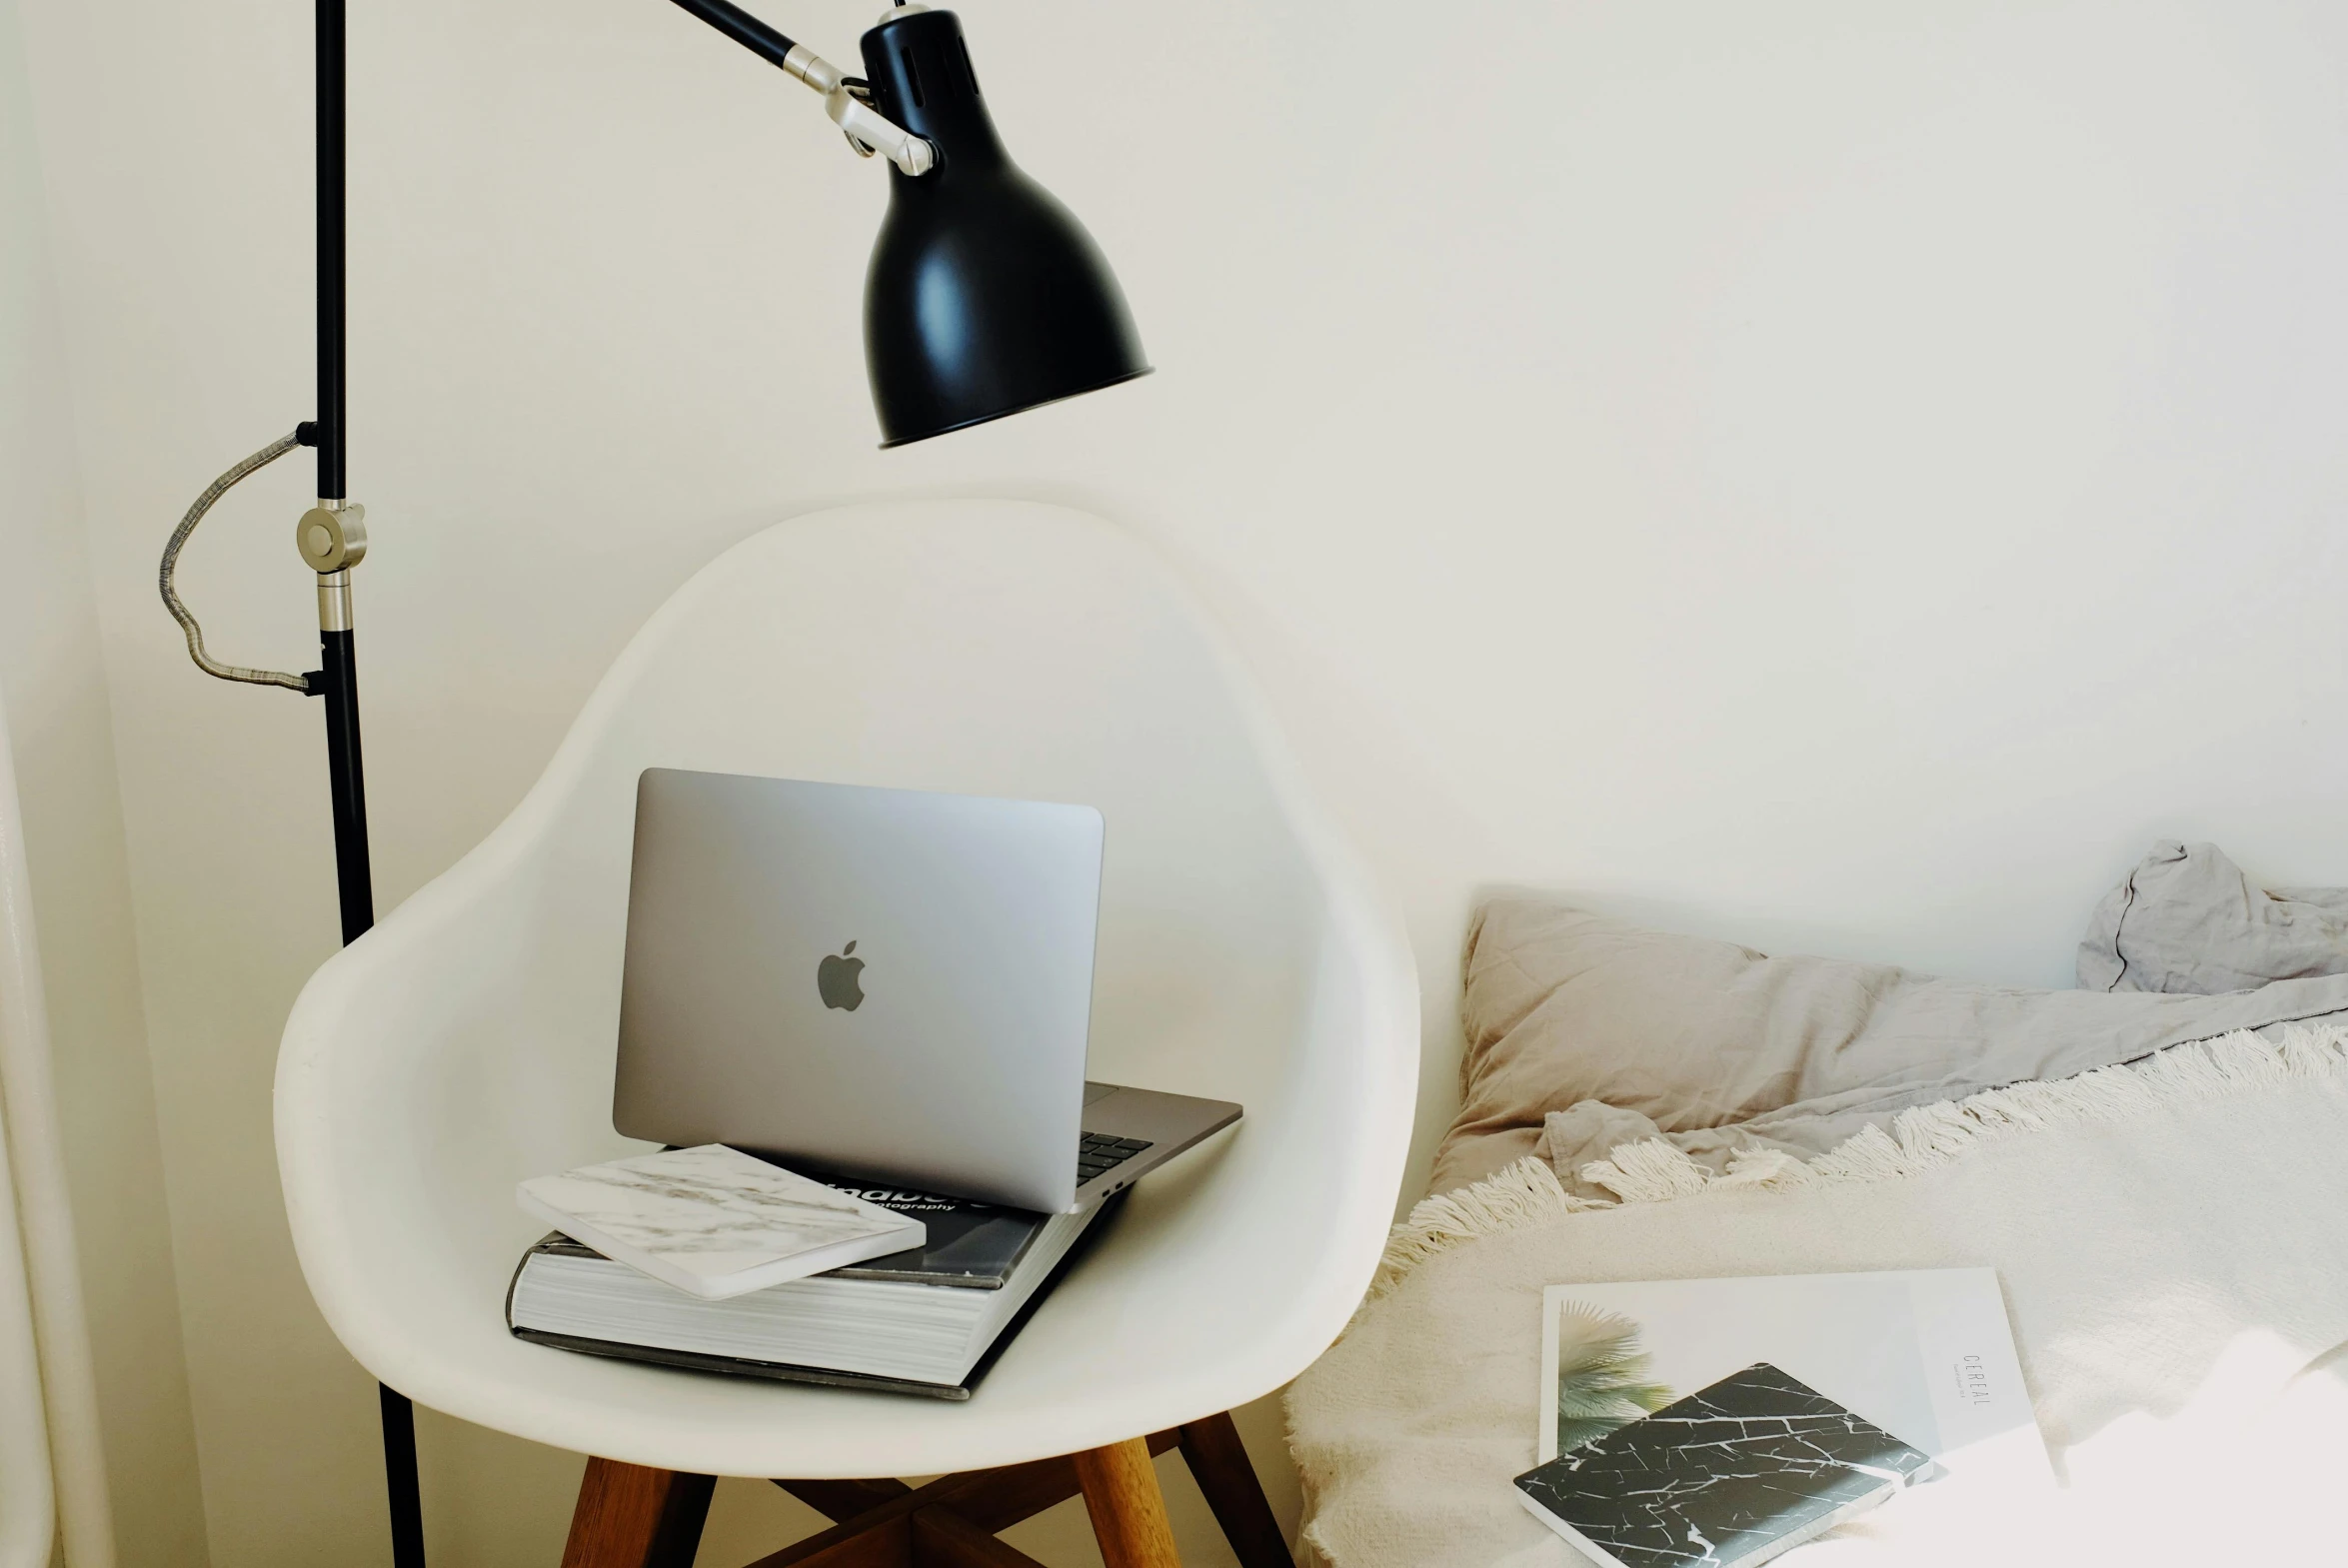 a laptop computer sitting on top of a chair next to a lamp